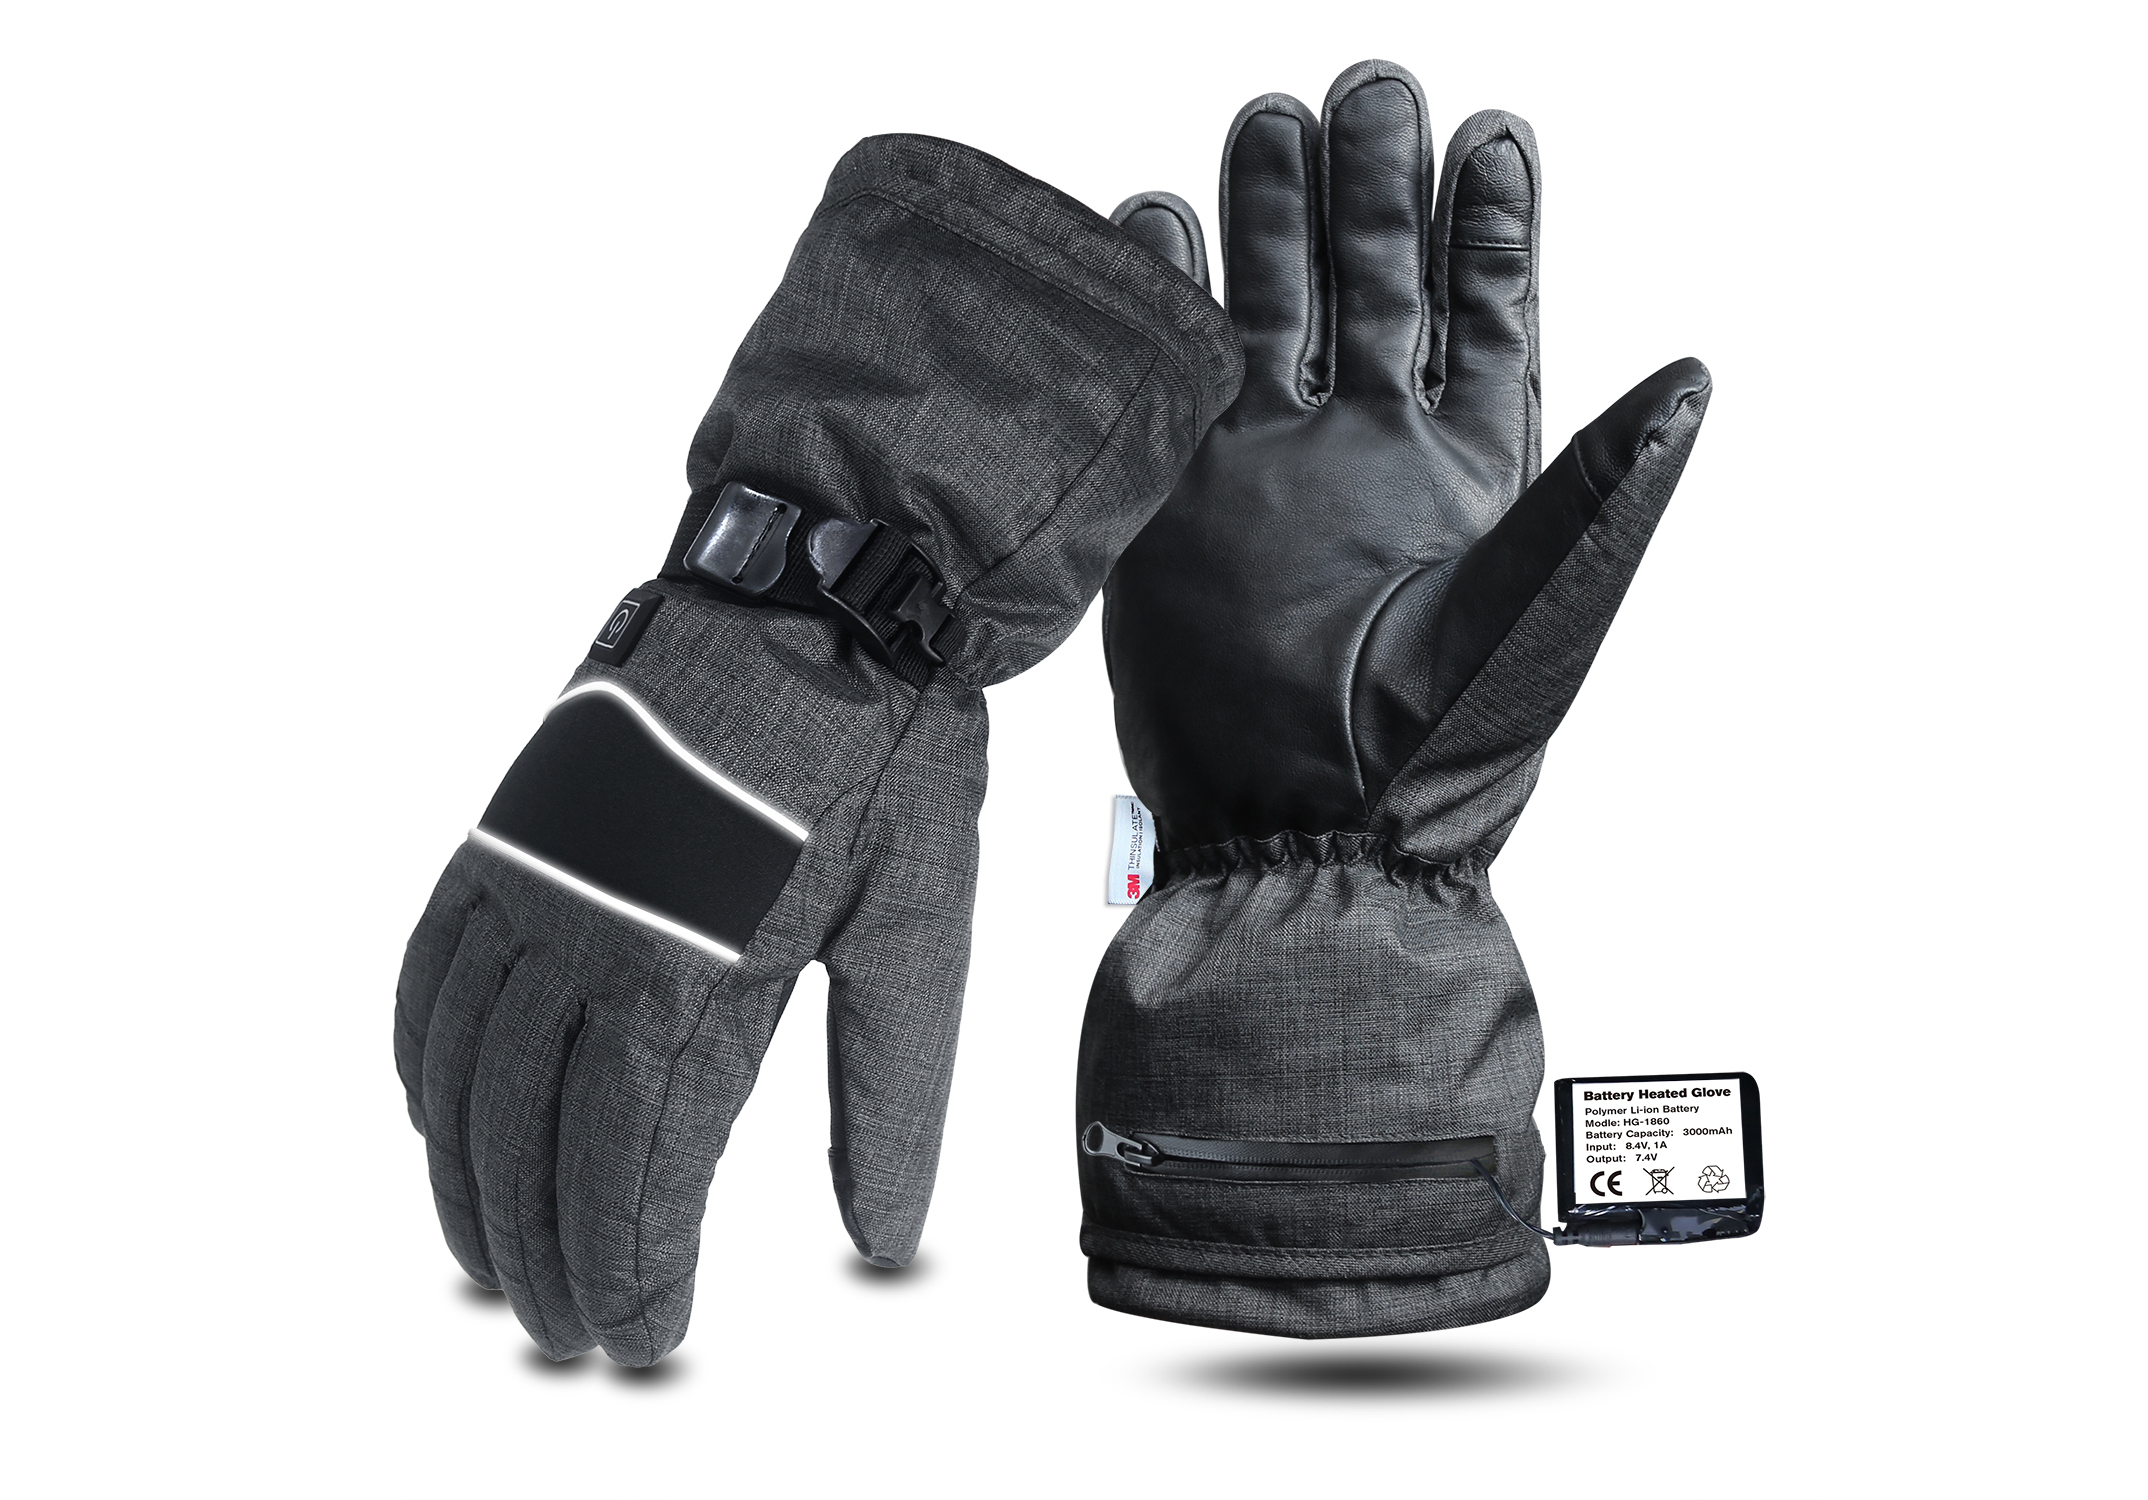 EHG-005 Heated Gloves with Battery